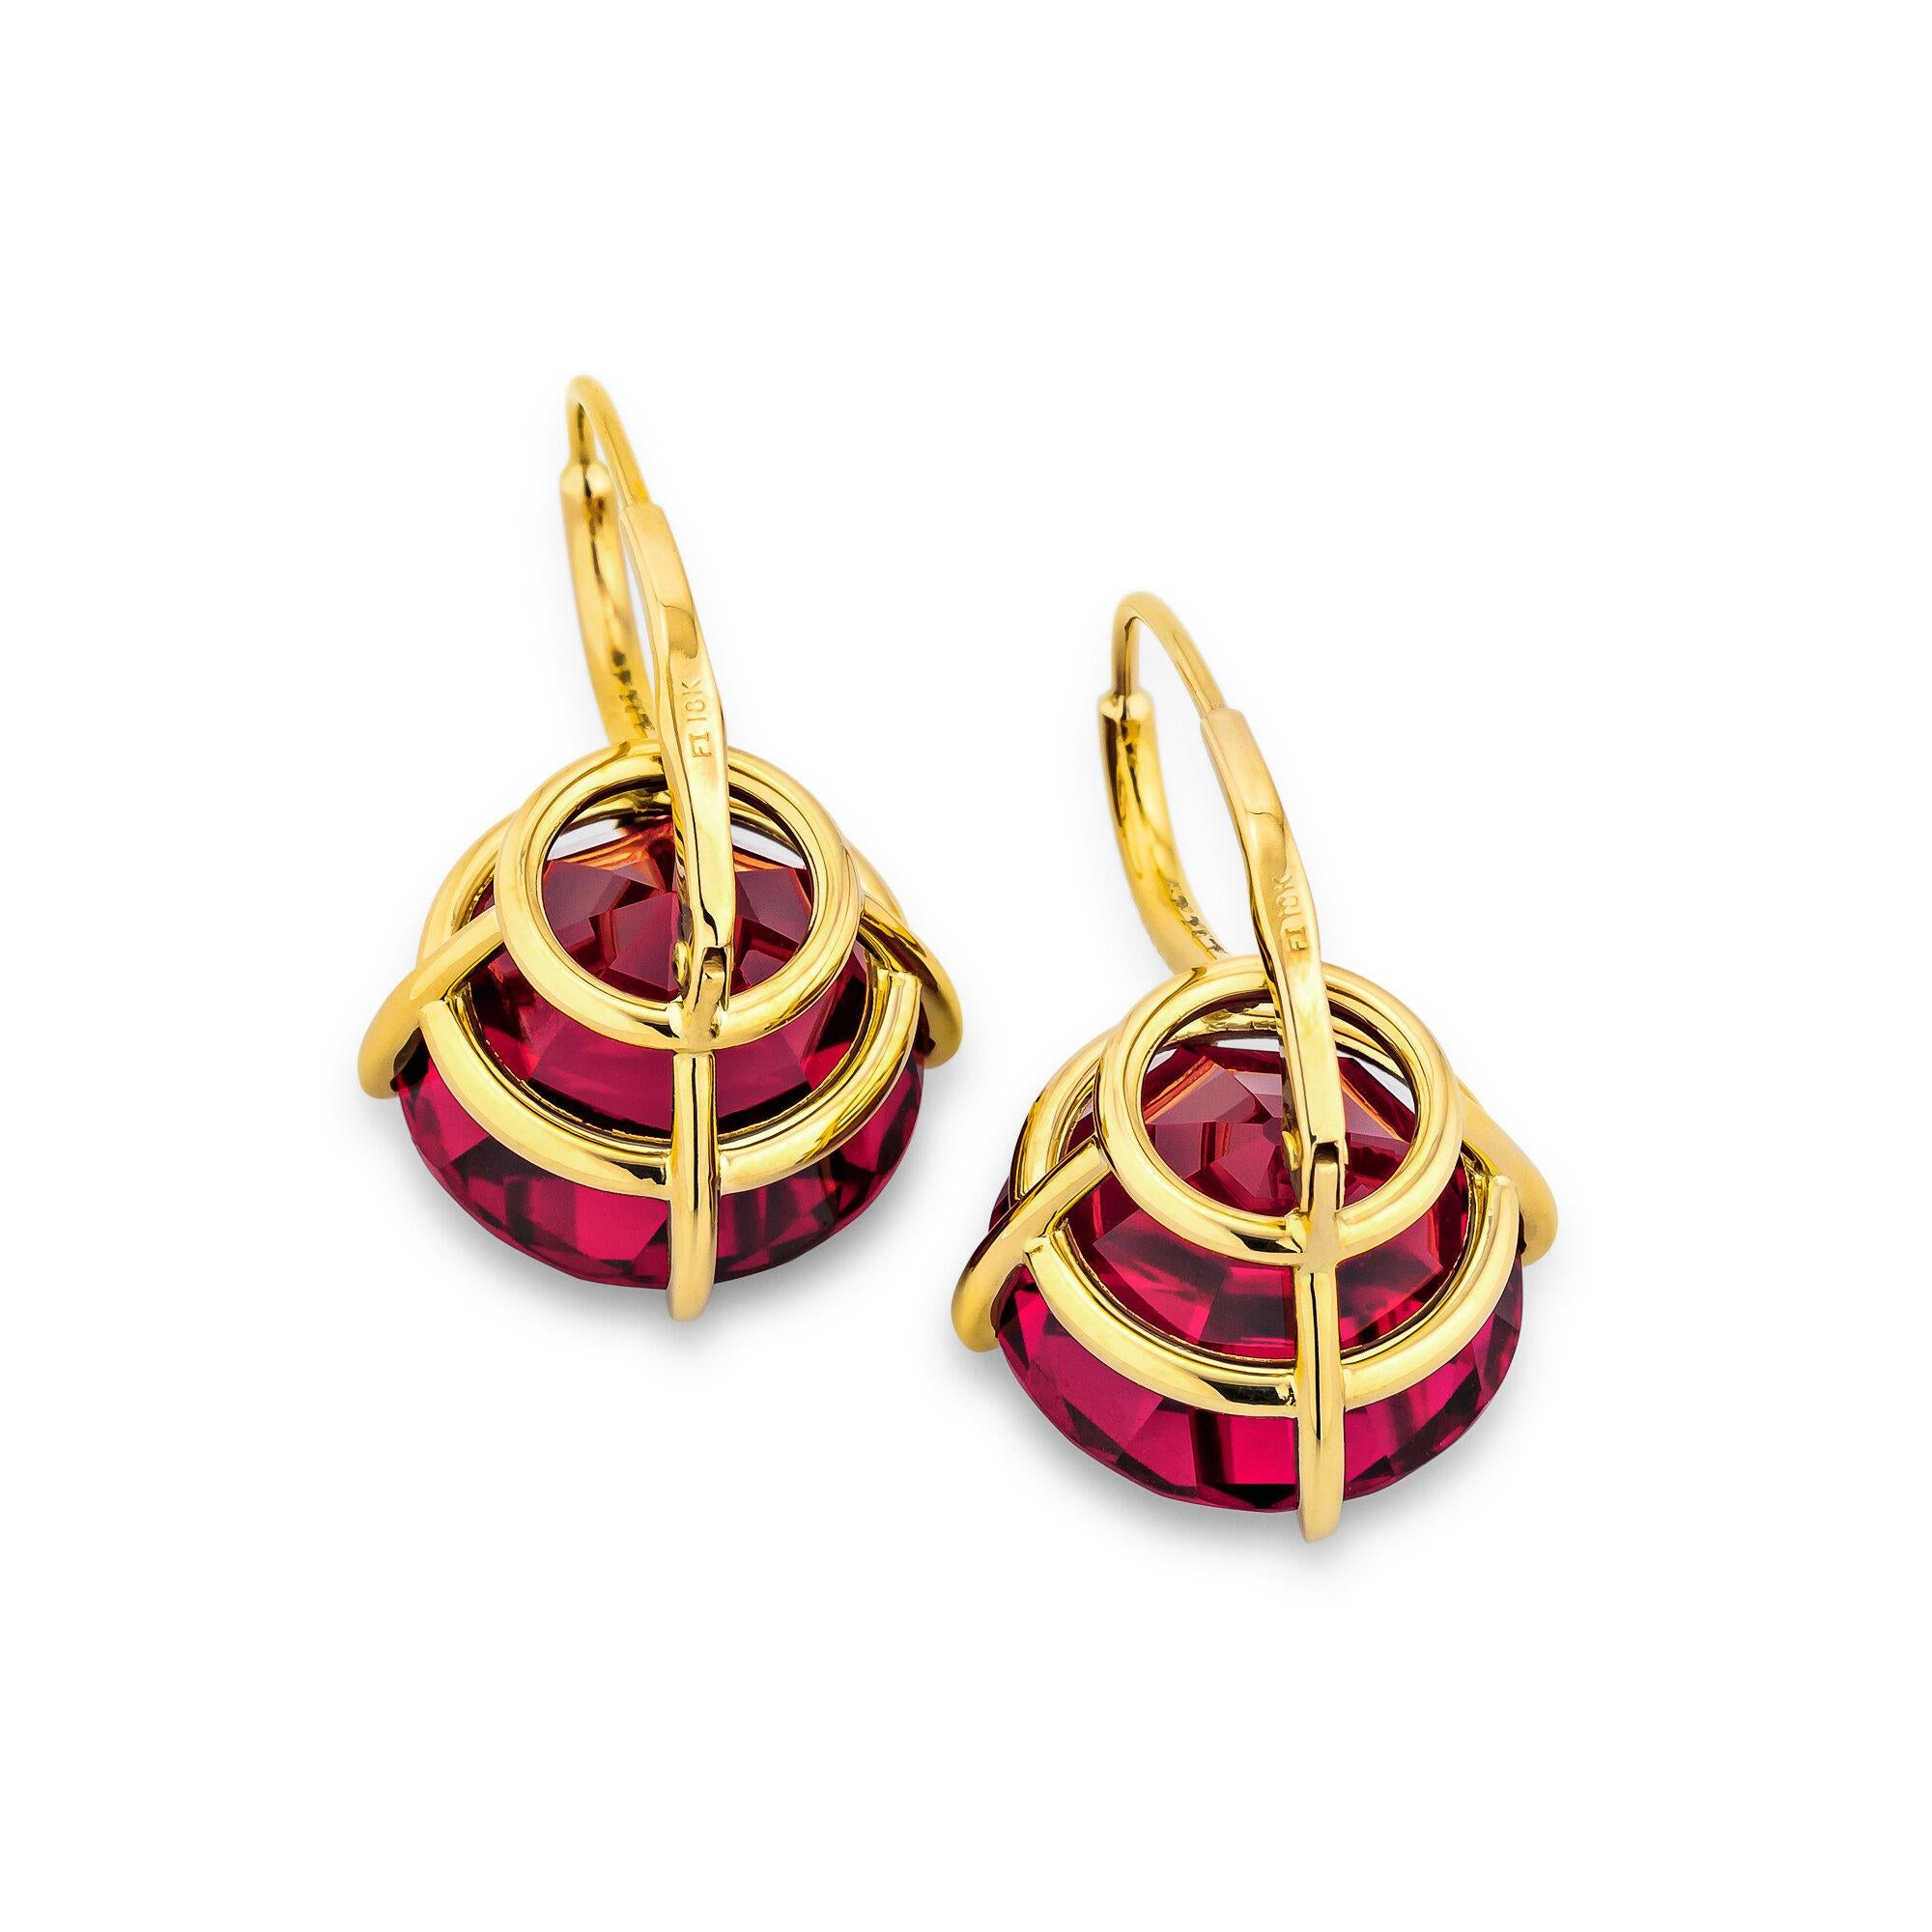 Deep and luscious rose red vintage cut rhodolite garnets move seductively from diamond and gold wires creating a pair of irresistibly wearable and timeless earrings.  Total rhodolite weight 26.48 carats.  Total diamond weight .05 carats.  18 karat